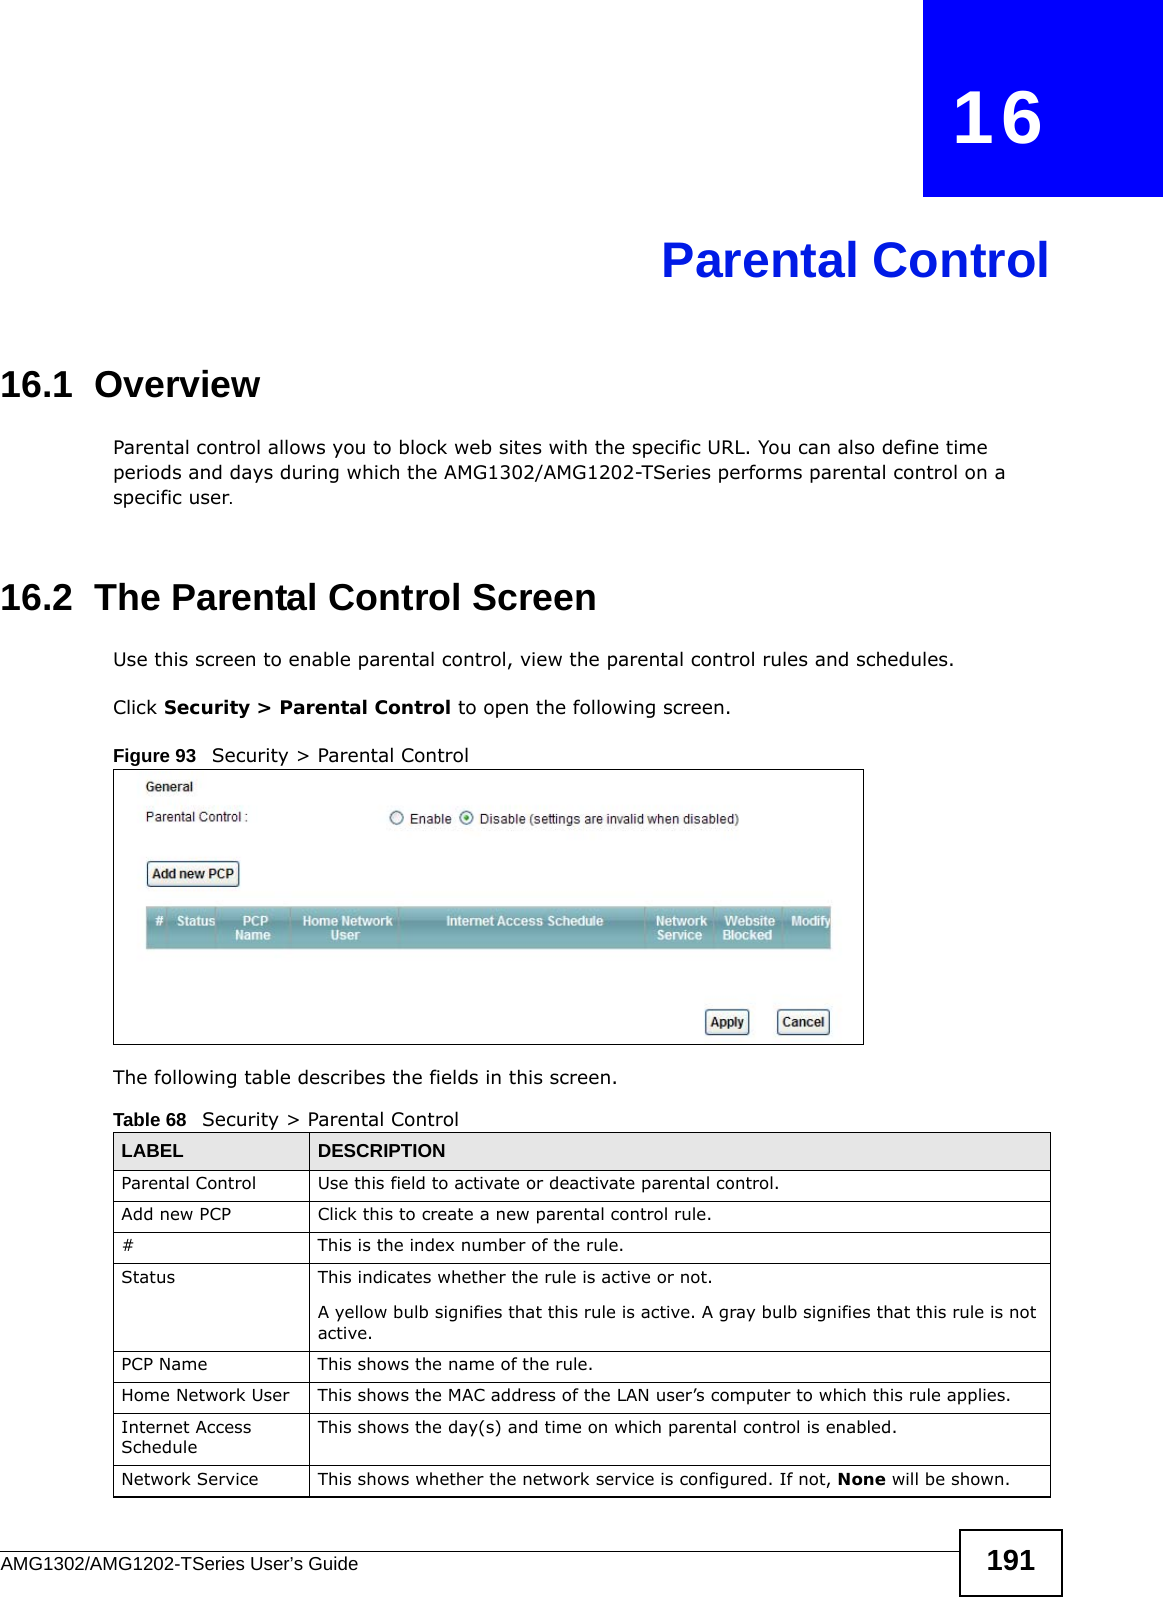 AMG1302/AMG1202-TSeries User’s Guide 191CHAPTER   16Parental Control16.1  OverviewParental control allows you to block web sites with the specific URL. You can also define time periods and days during which the AMG1302/AMG1202-TSeries performs parental control on a specific user.16.2  The Parental Control ScreenUse this screen to enable parental control, view the parental control rules and schedules.Click Security &gt; Parental Control to open the following screen. Figure 93   Security &gt; Parental Control  The following table describes the fields in this screen. Table 68   Security &gt; Parental ControlLABEL DESCRIPTIONParental Control Use this field to activate or deactivate parental control.Add new PCP Click this to create a new parental control rule.# This is the index number of the rule.Status This indicates whether the rule is active or not.A yellow bulb signifies that this rule is active. A gray bulb signifies that this rule is not active.PCP Name This shows the name of the rule.Home Network User This shows the MAC address of the LAN user’s computer to which this rule applies.Internet Access ScheduleThis shows the day(s) and time on which parental control is enabled.Network Service This shows whether the network service is configured. If not, None will be shown.